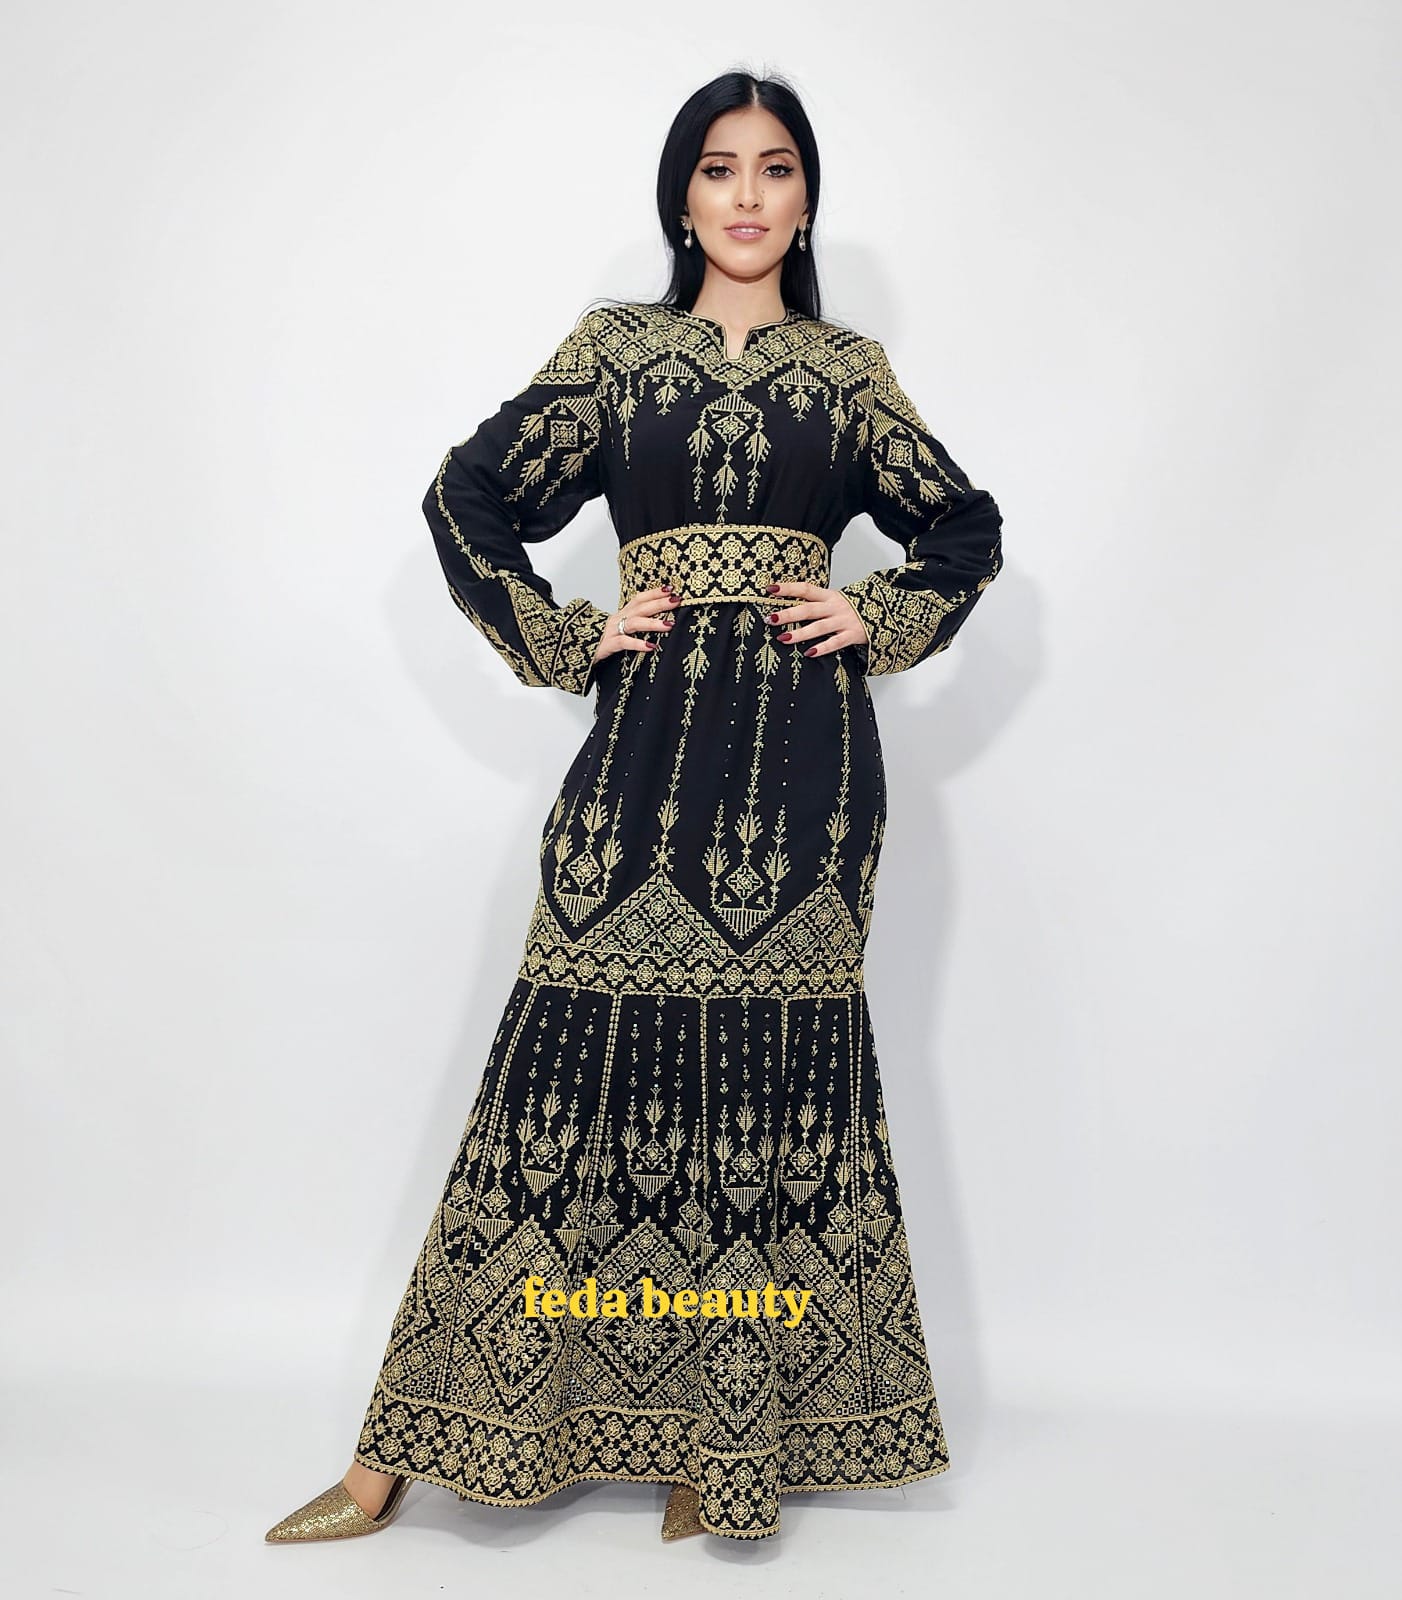 An embroidered dress from Fida Beauty's new collection for the year 2023